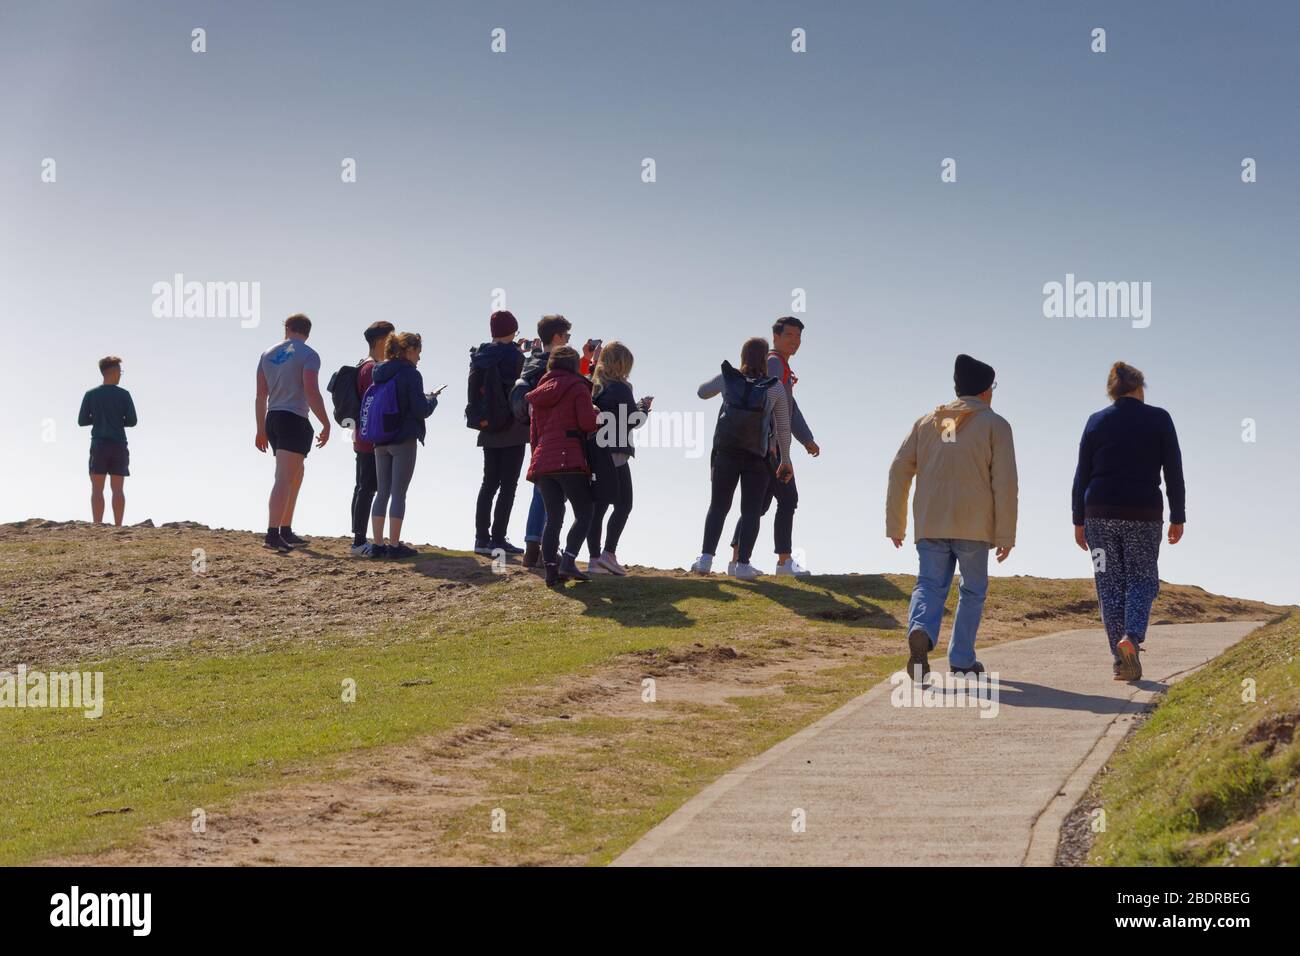 Pictured: A group of walkers on the coastal path by Langland Bay near Swansea, Wales, UK. Sunday 22 March 2020 Re: Covid-19 Coronavirus pandemic, UK. Stock Photo